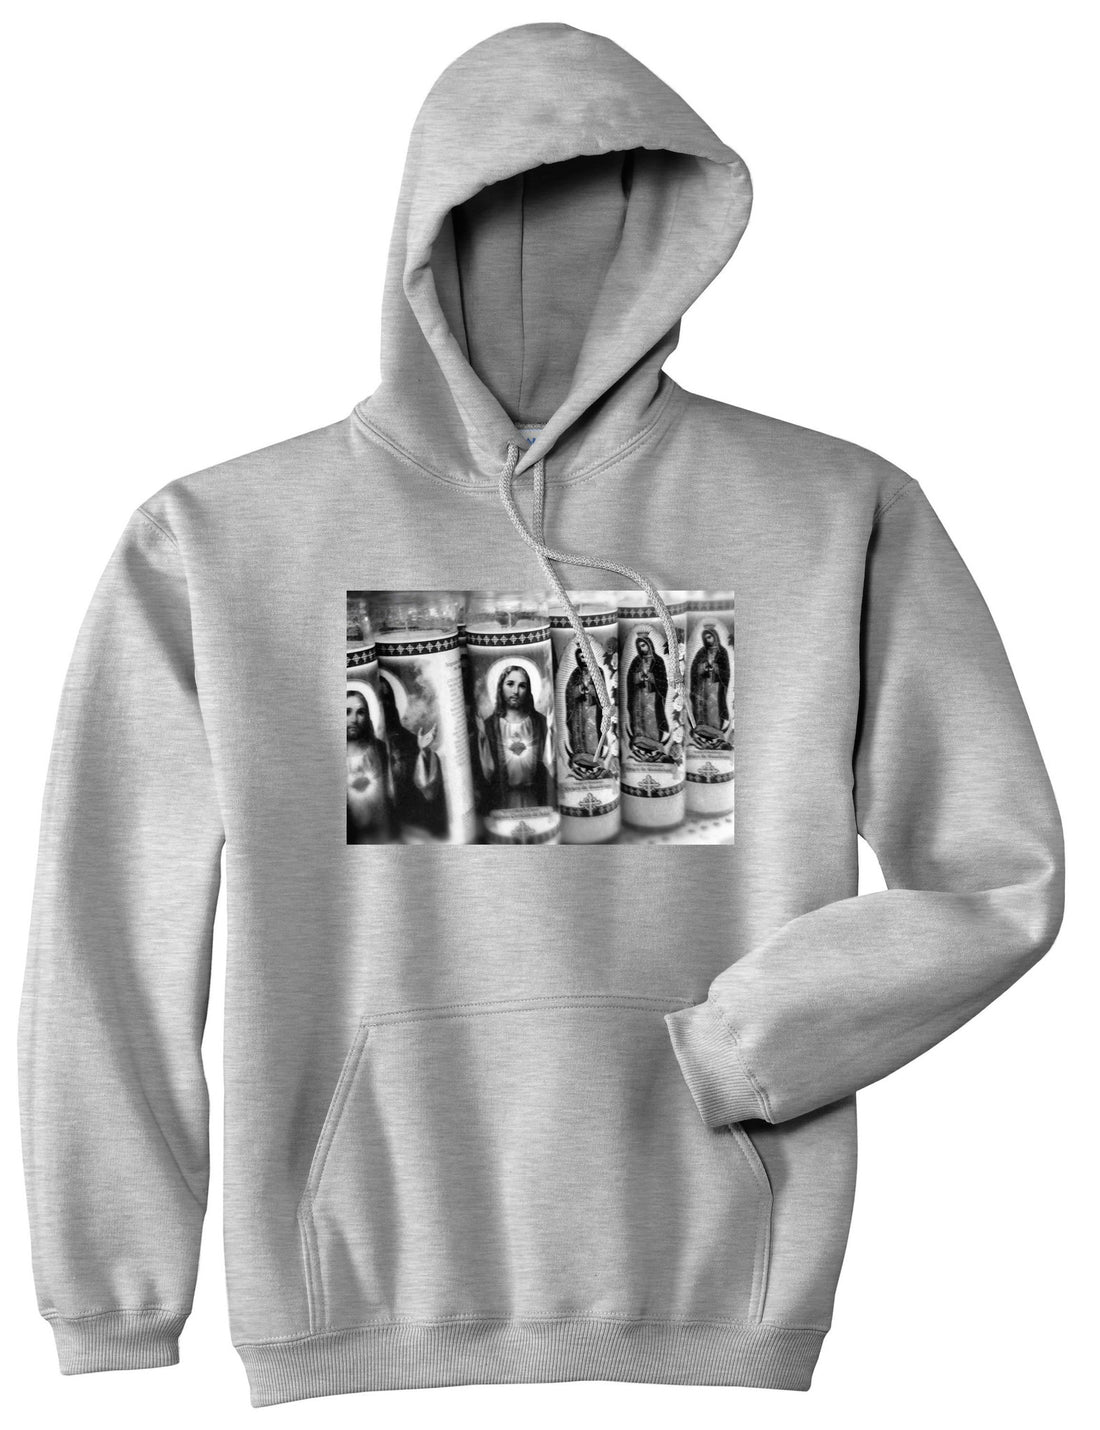 Candles Religious God Jesus Mary Fire NYC Boys Kids Pullover Hoodie Hoody In Grey by Kings Of NY